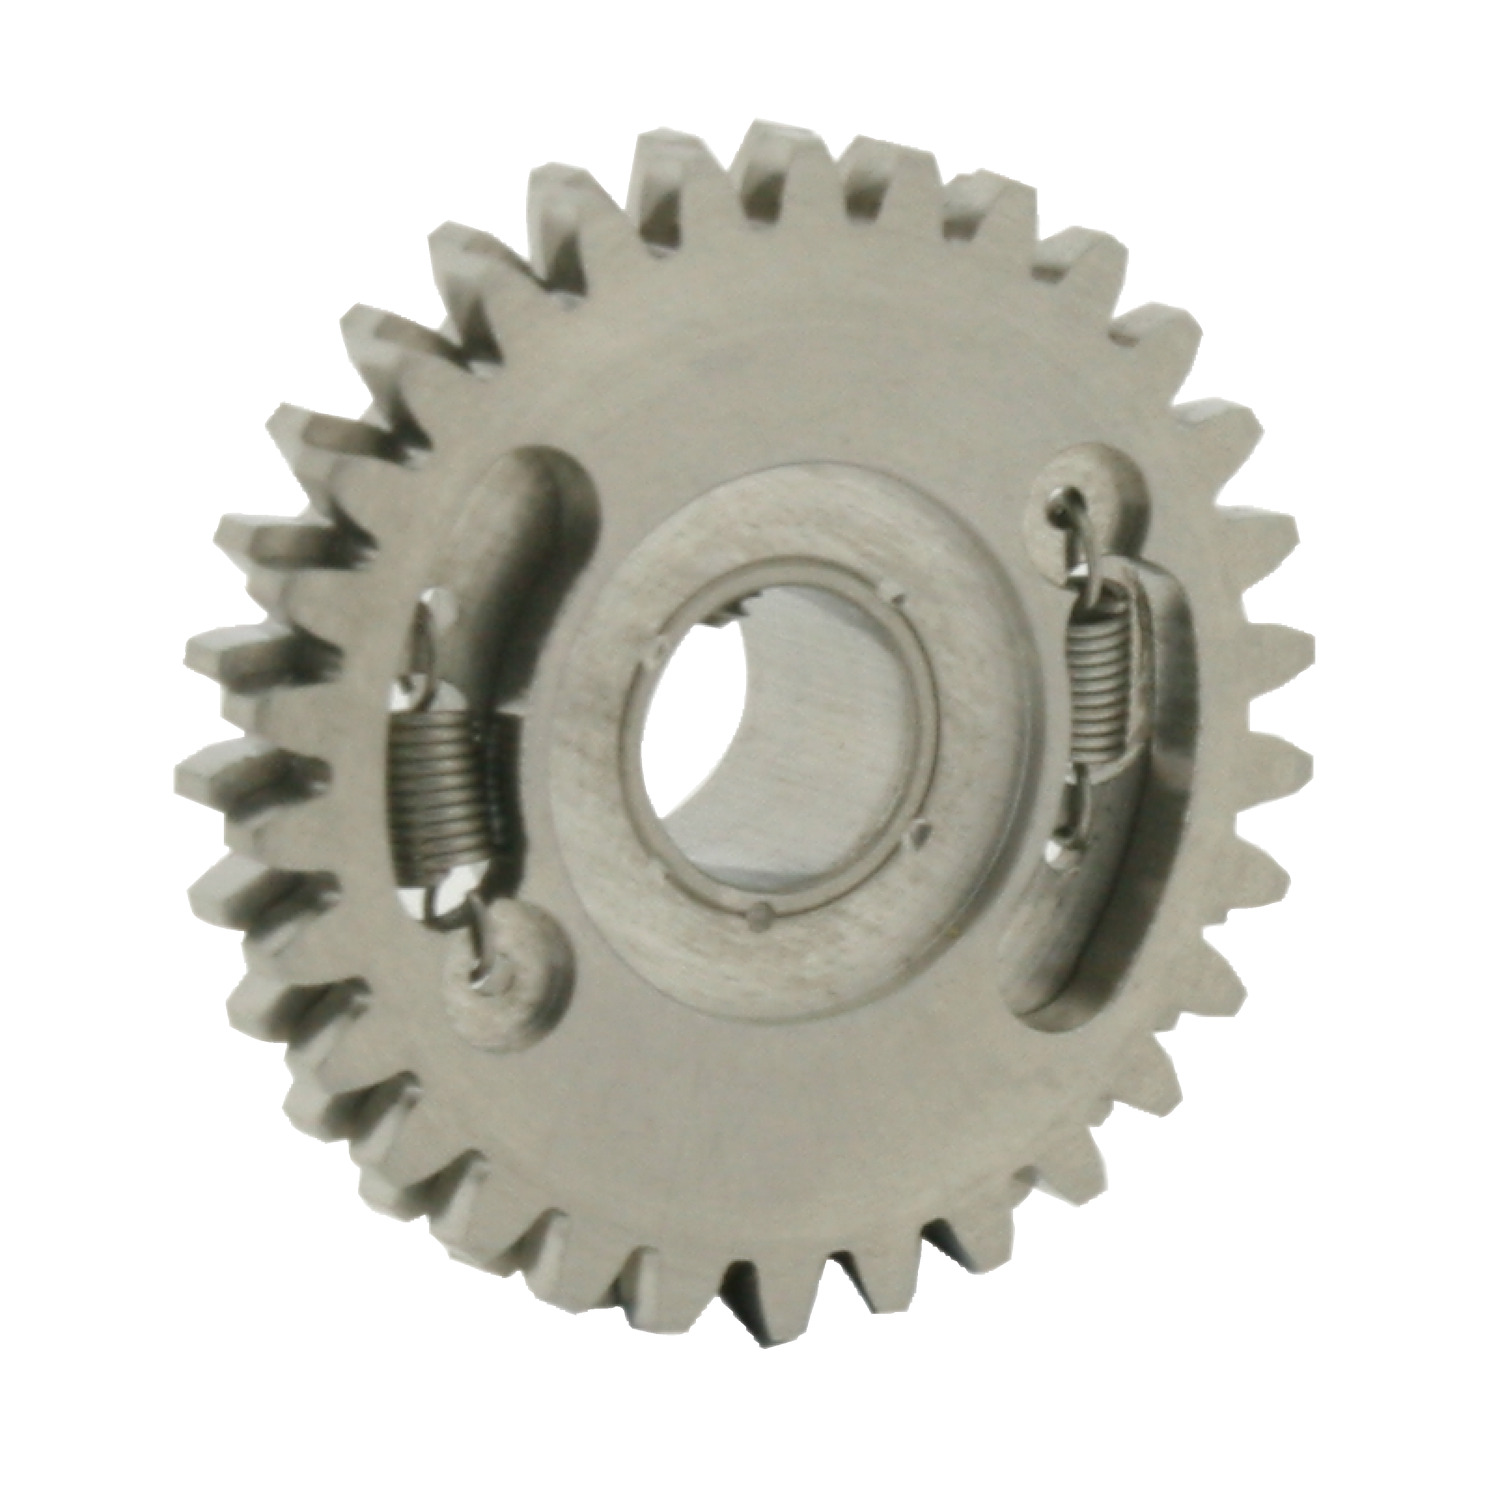 Product R2084, Spur Gears Stainless Steel / 